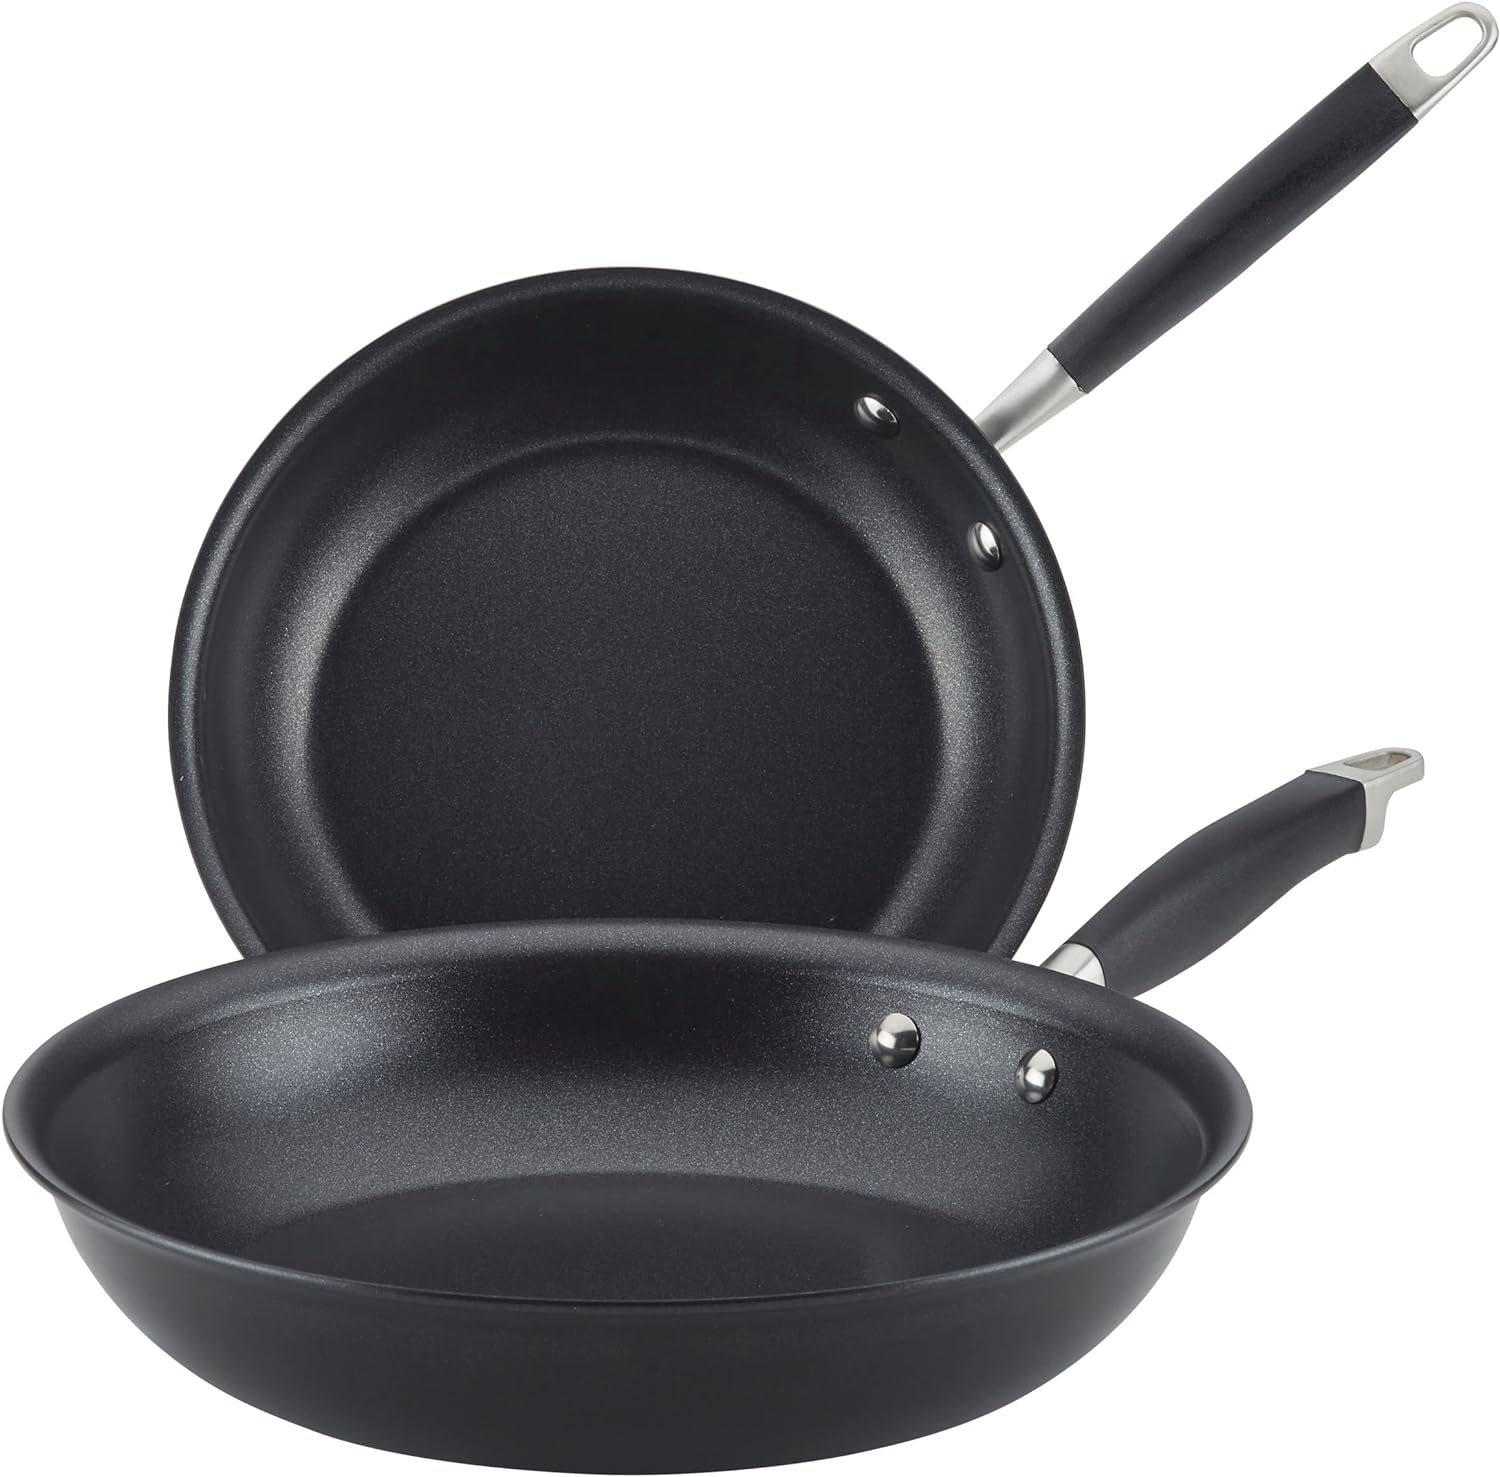 Anolon Advanced Home Hard Anodized Nonstick Frying Pan\/Skillet, 12.75 Inch, Moonstone